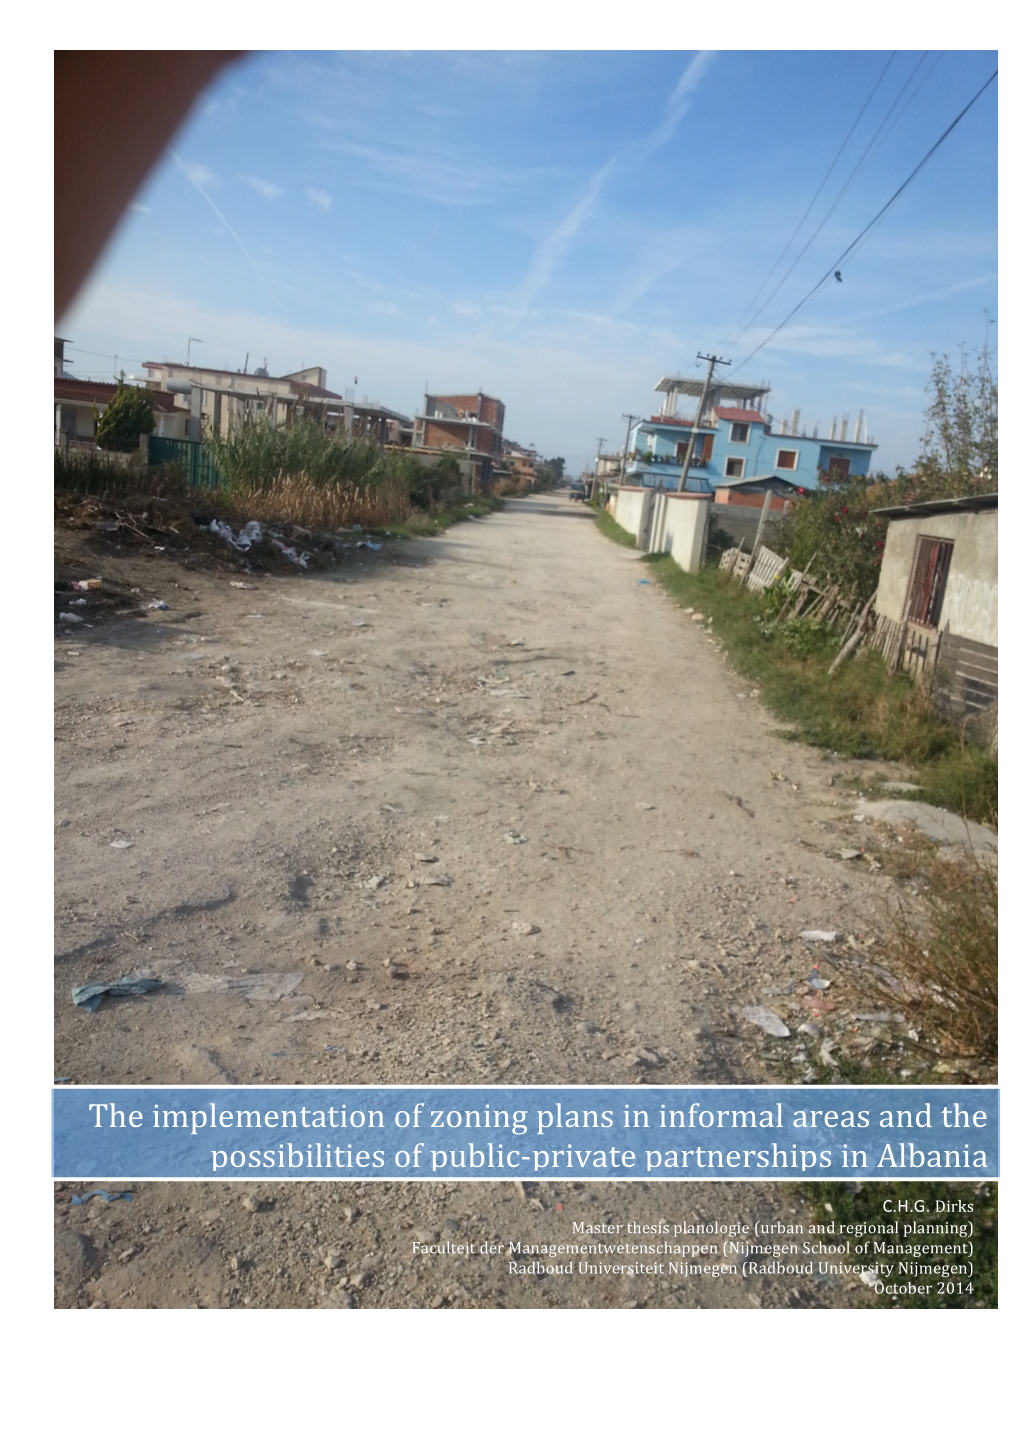 The Implementation of Zoning Plans in Informal Areas and the Possibilities of Public-Private Partnerships in Albania C.H.G